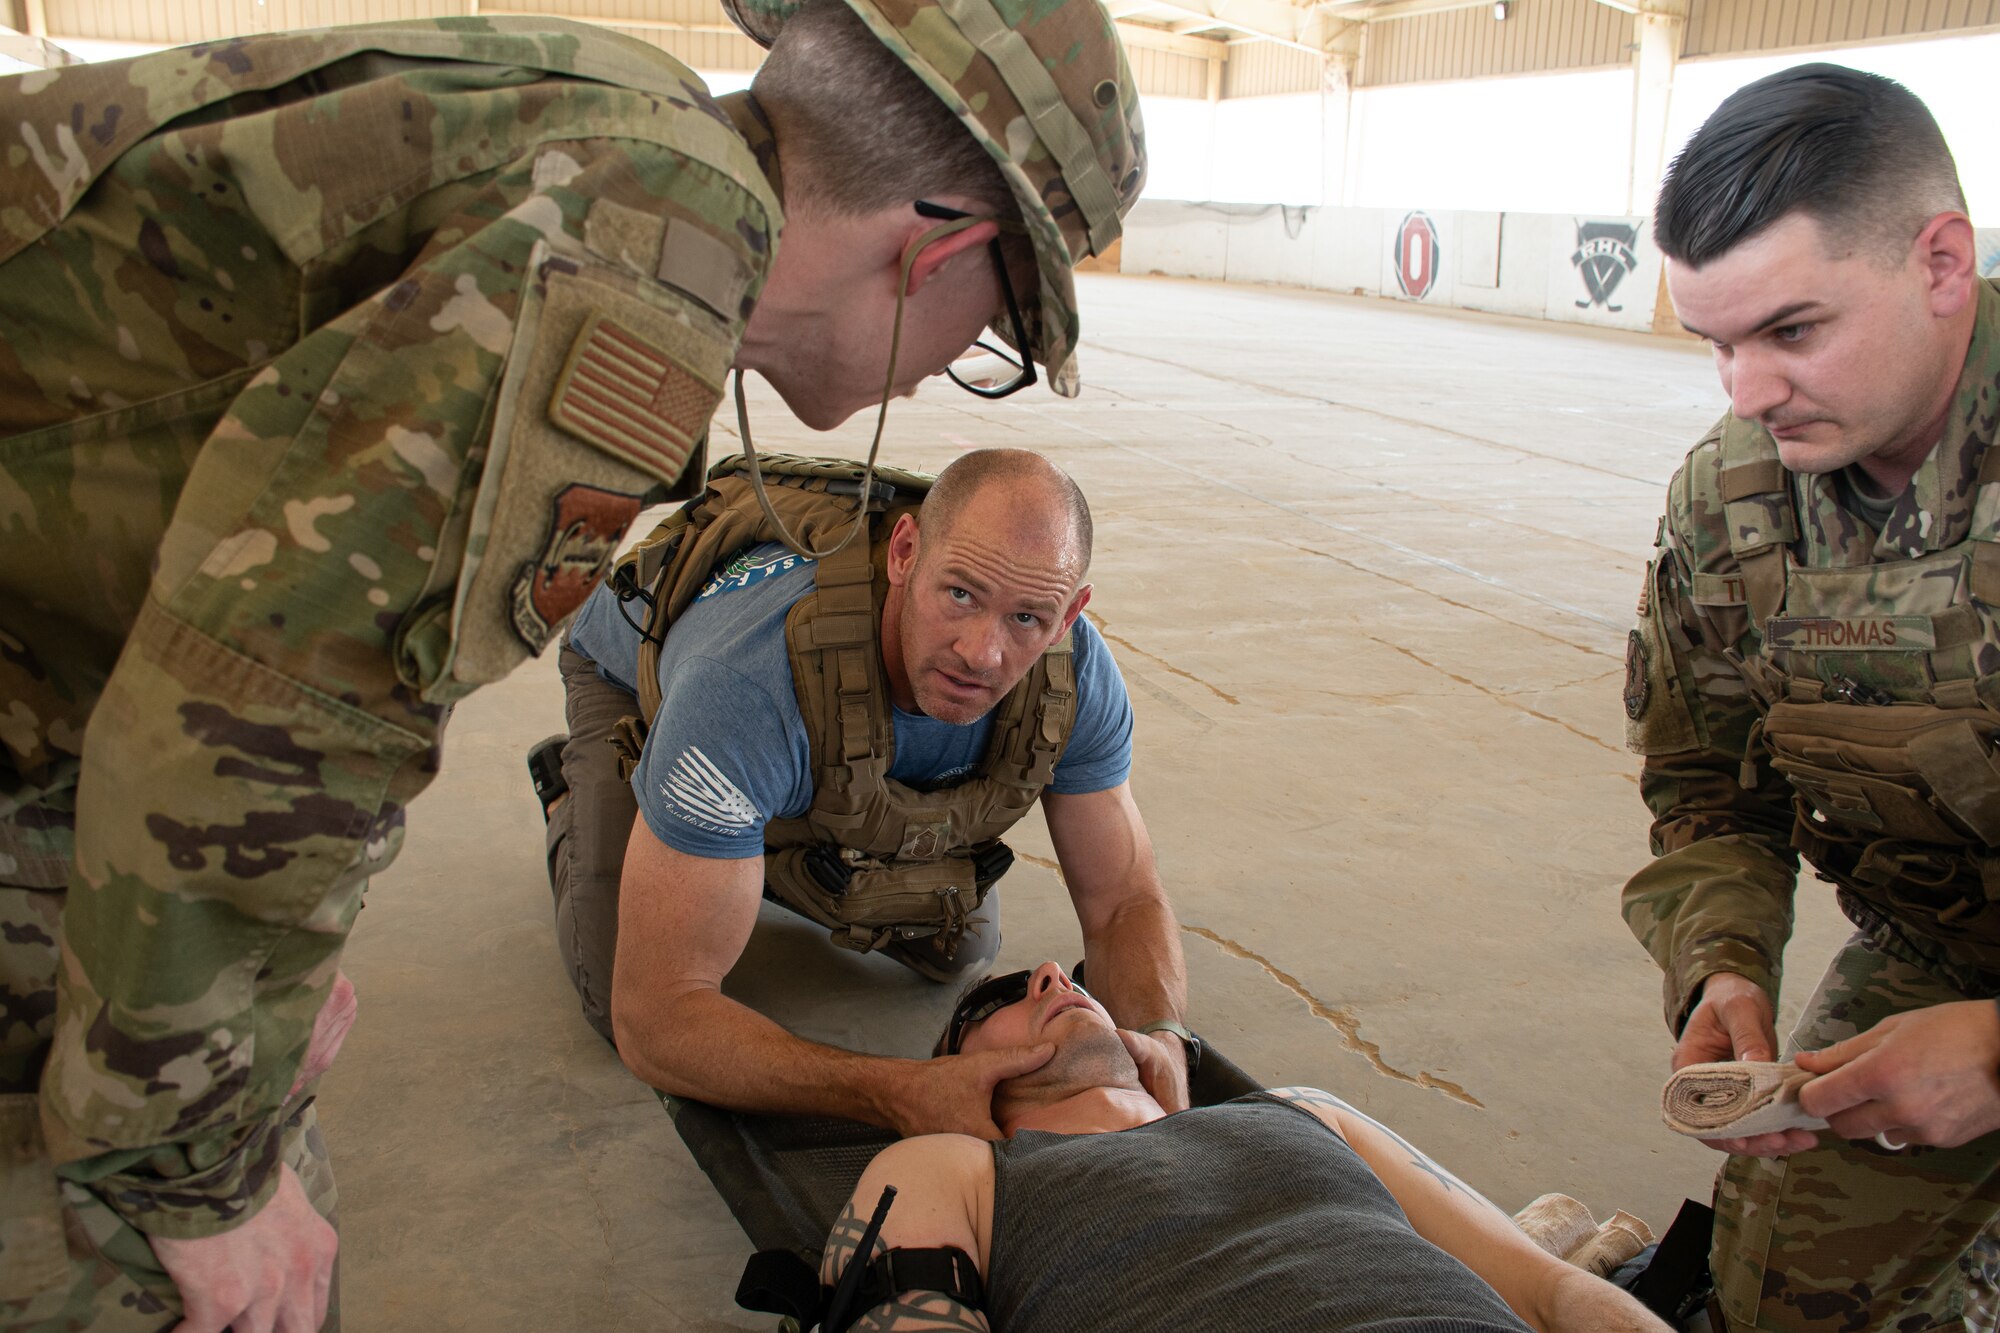 The 386th Expeditionary Medical Group hosted a joint coalition tactical combat casualty care all service members course.  TCCC was designed to lessen combat deaths by providing trauma stabilization techniques for the wounded to survive long enough to receive life-saving treatment at a medical facility.